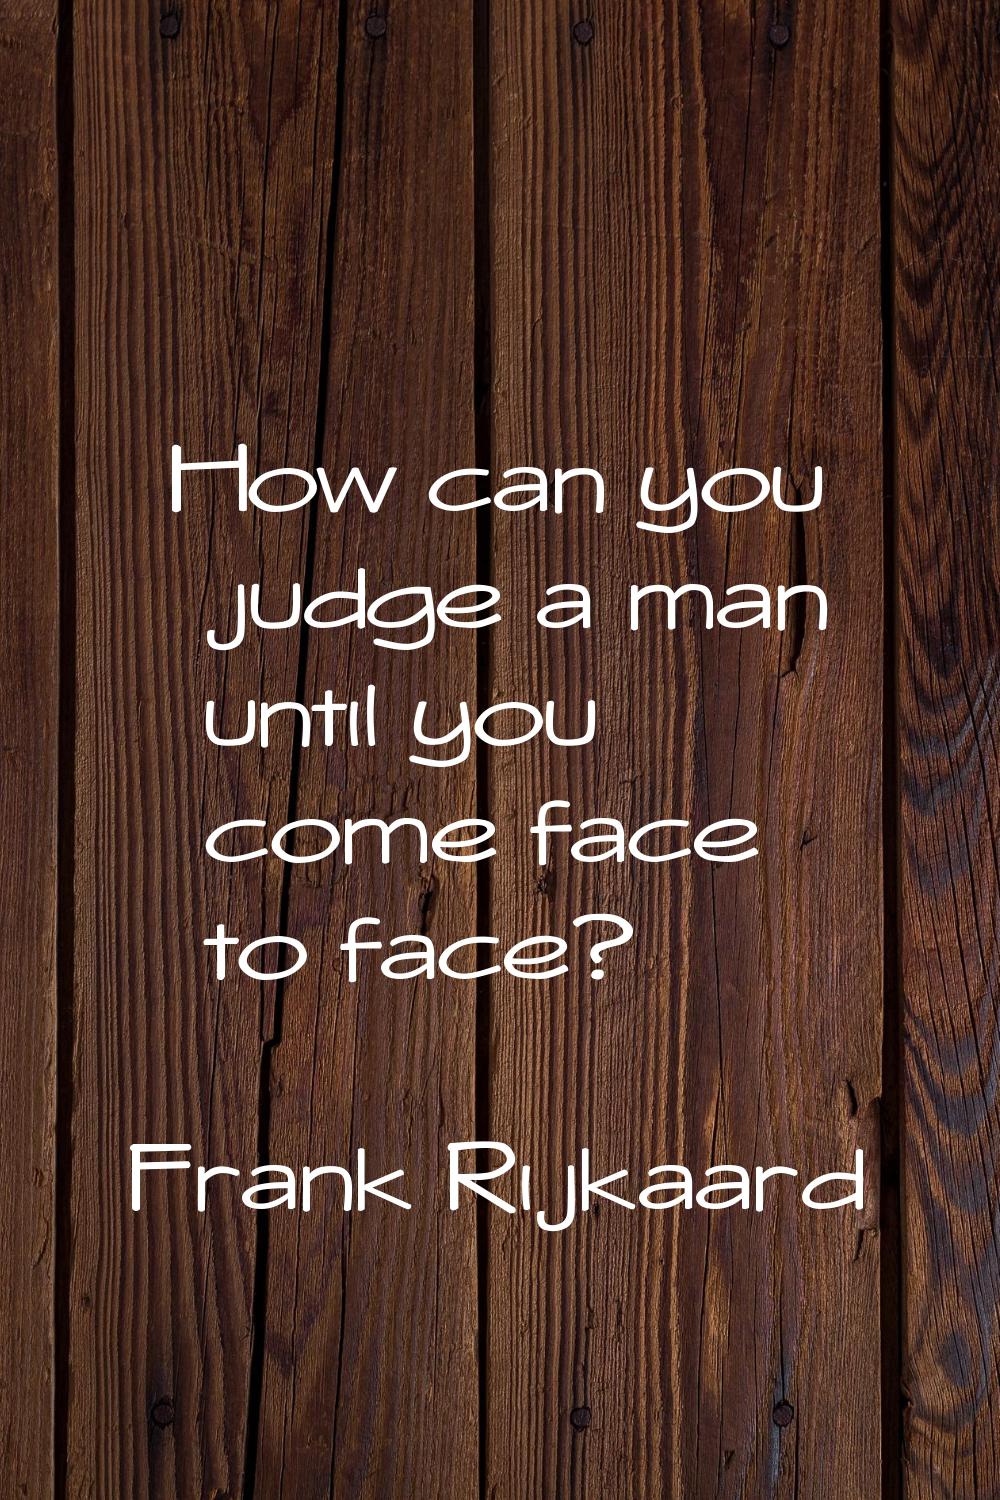 How can you judge a man until you come face to face?